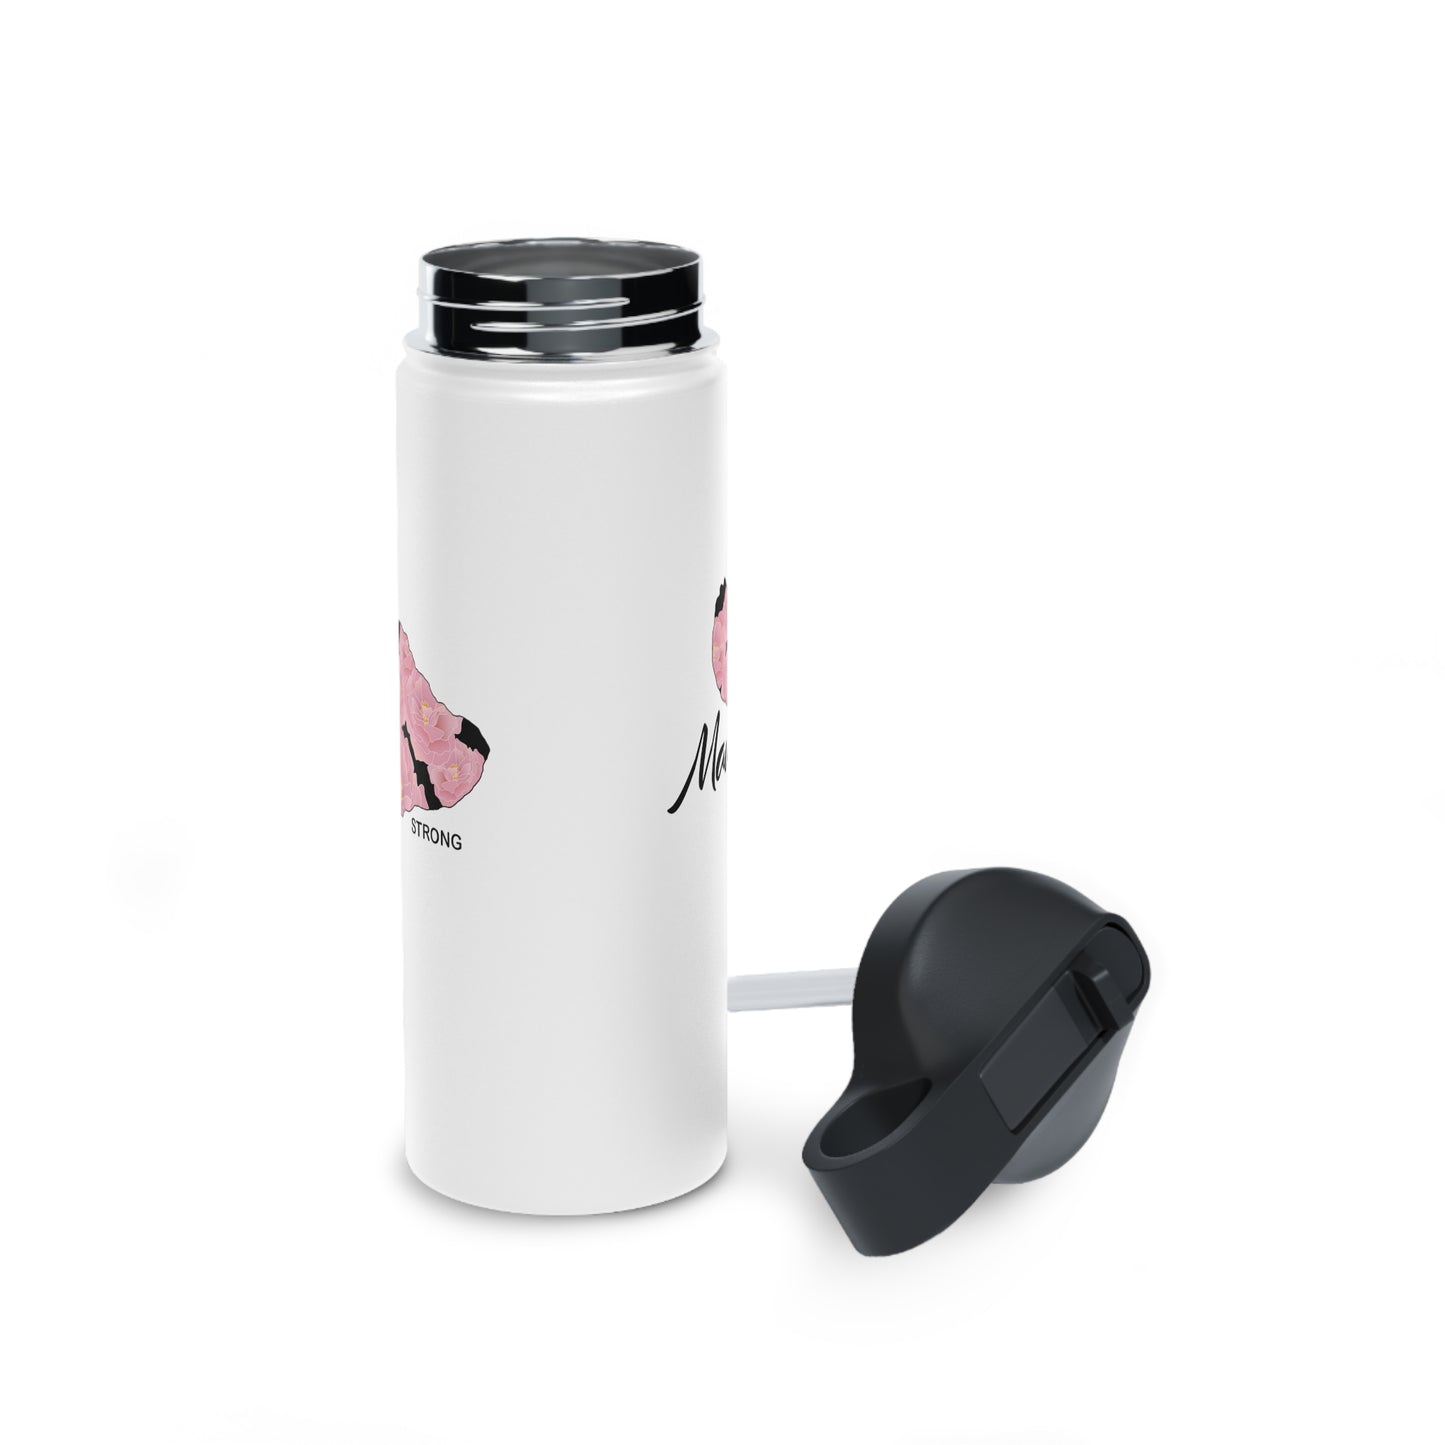 Water Bottle, 3 sizes, Stainless Steel with Sip Straw- Maui Strong Lokelani Rose Island